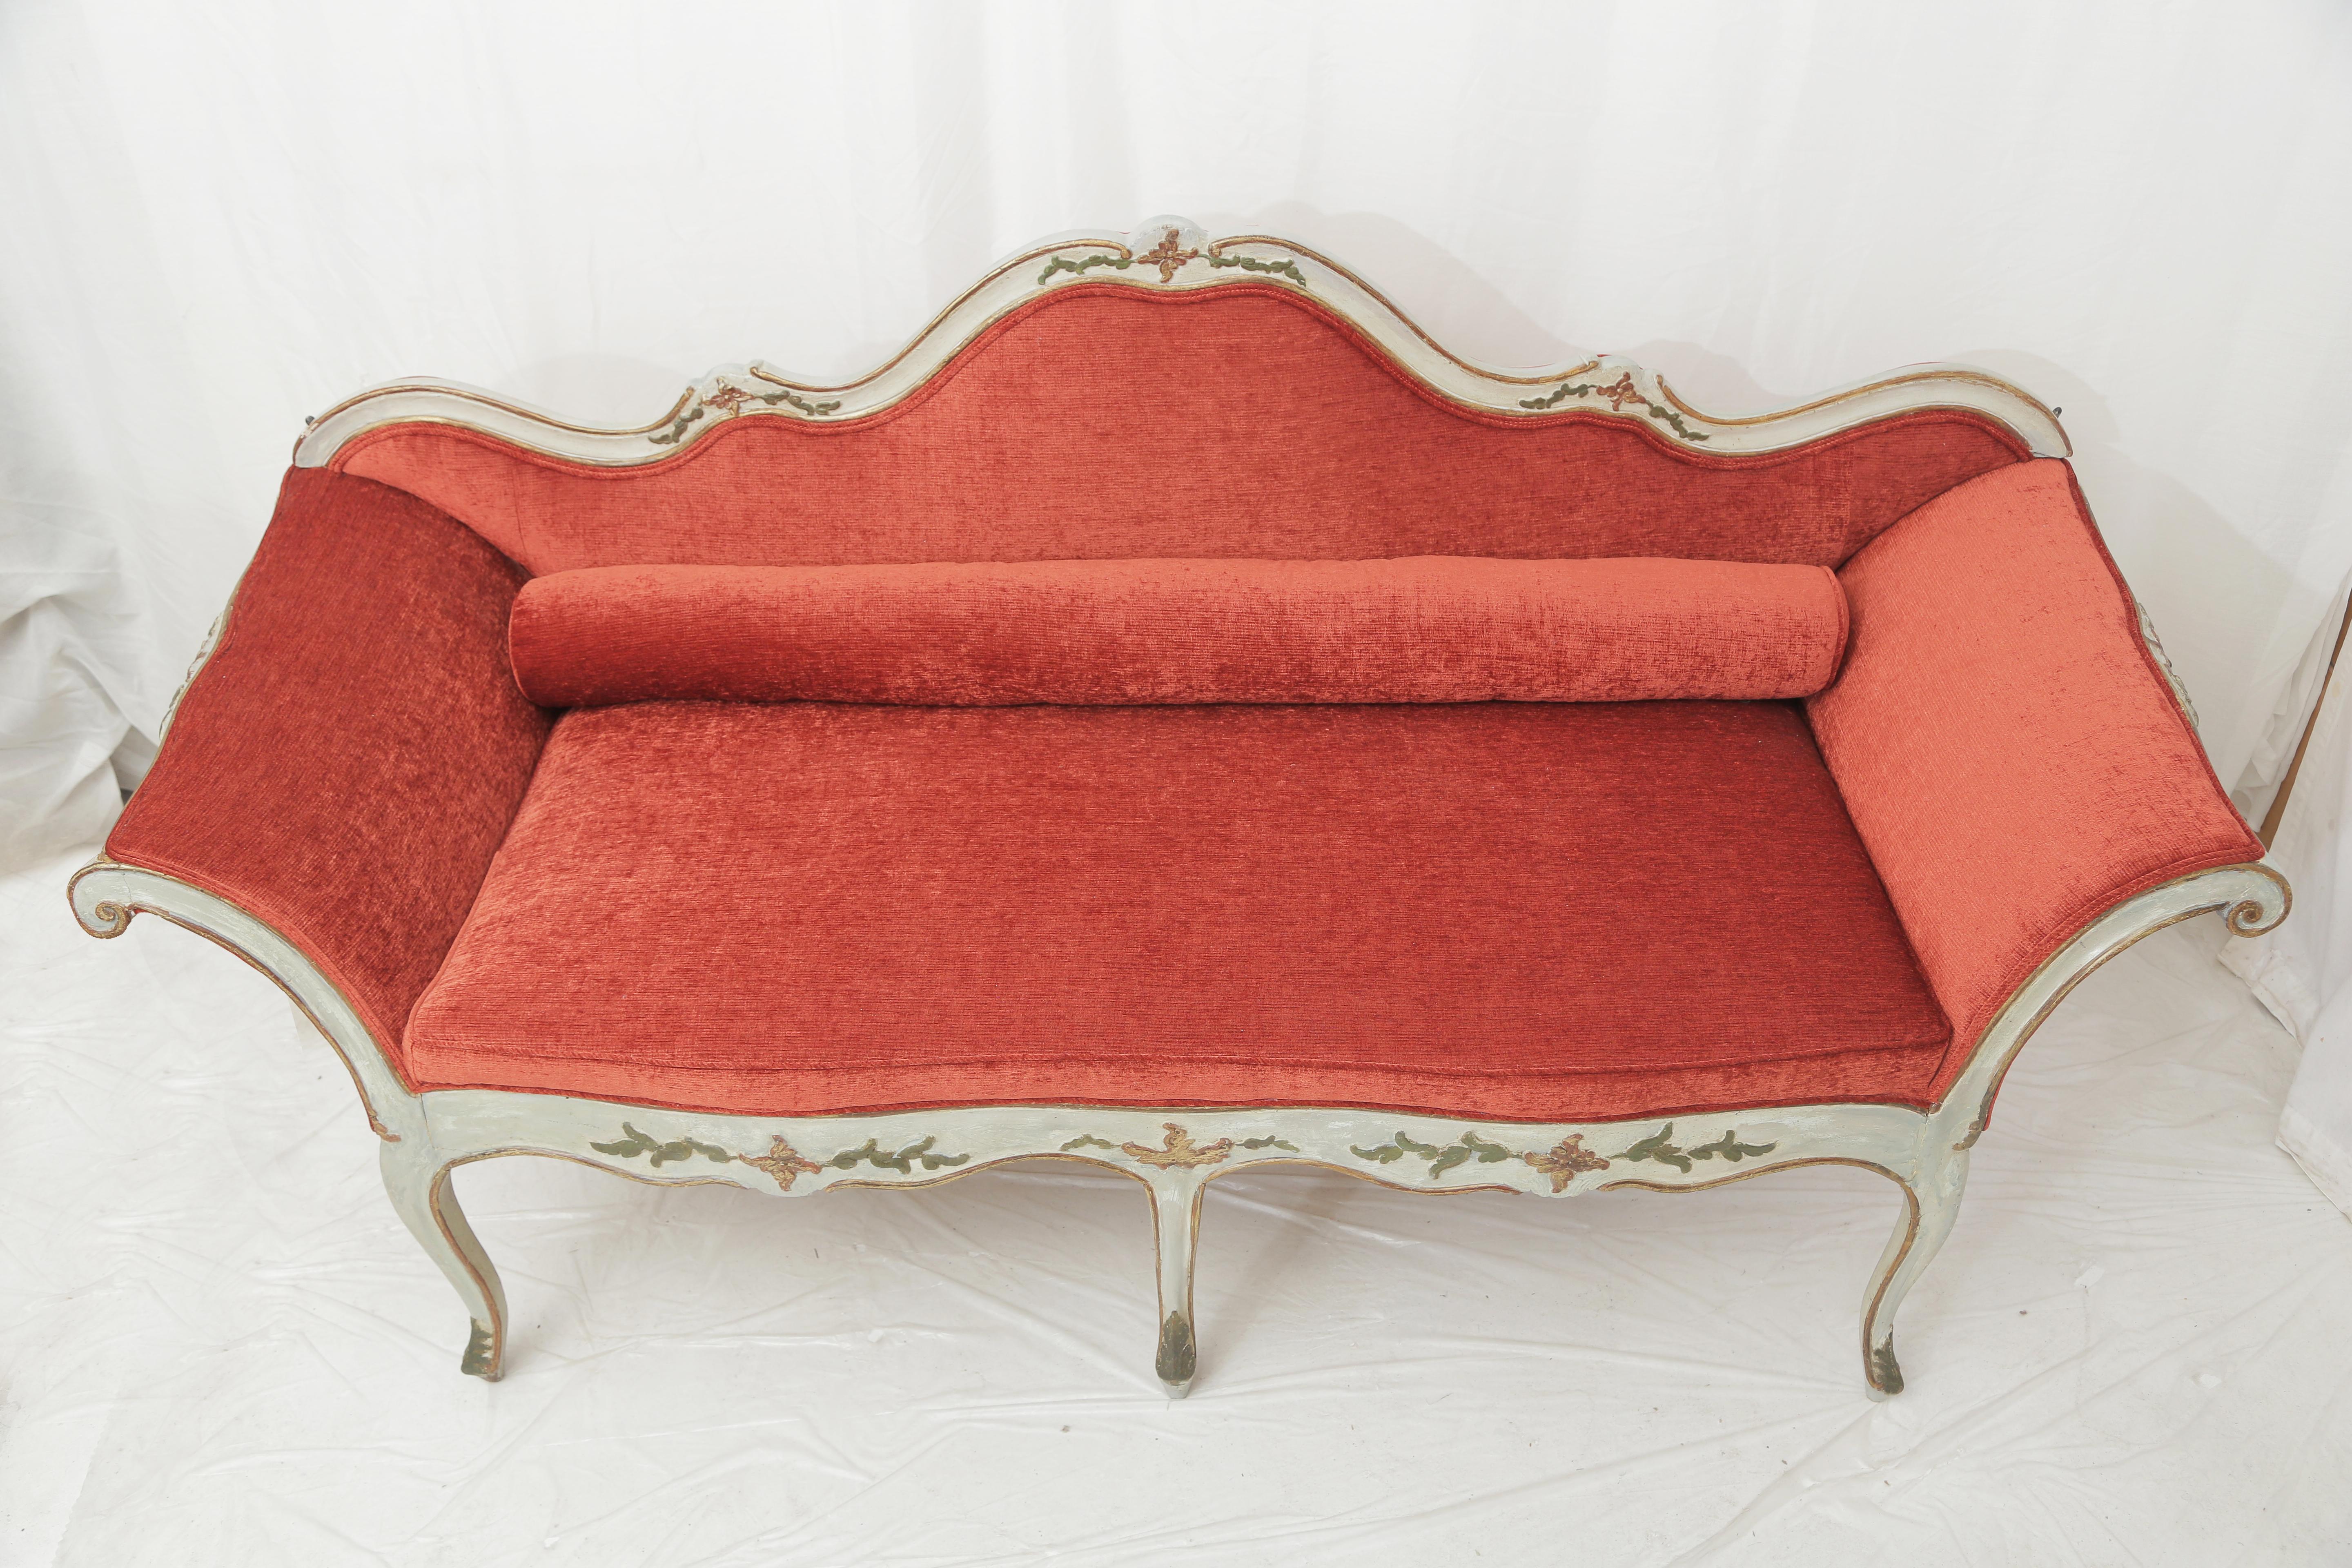 Italian sofa probably Piedmontese  painted with a light grey patina (original color) on a walnut frame.
Flowers and vegetal carvings all around the front part of the frame.
Entirely re-upholstered with a coral velvet fabric.
The paint of the frame